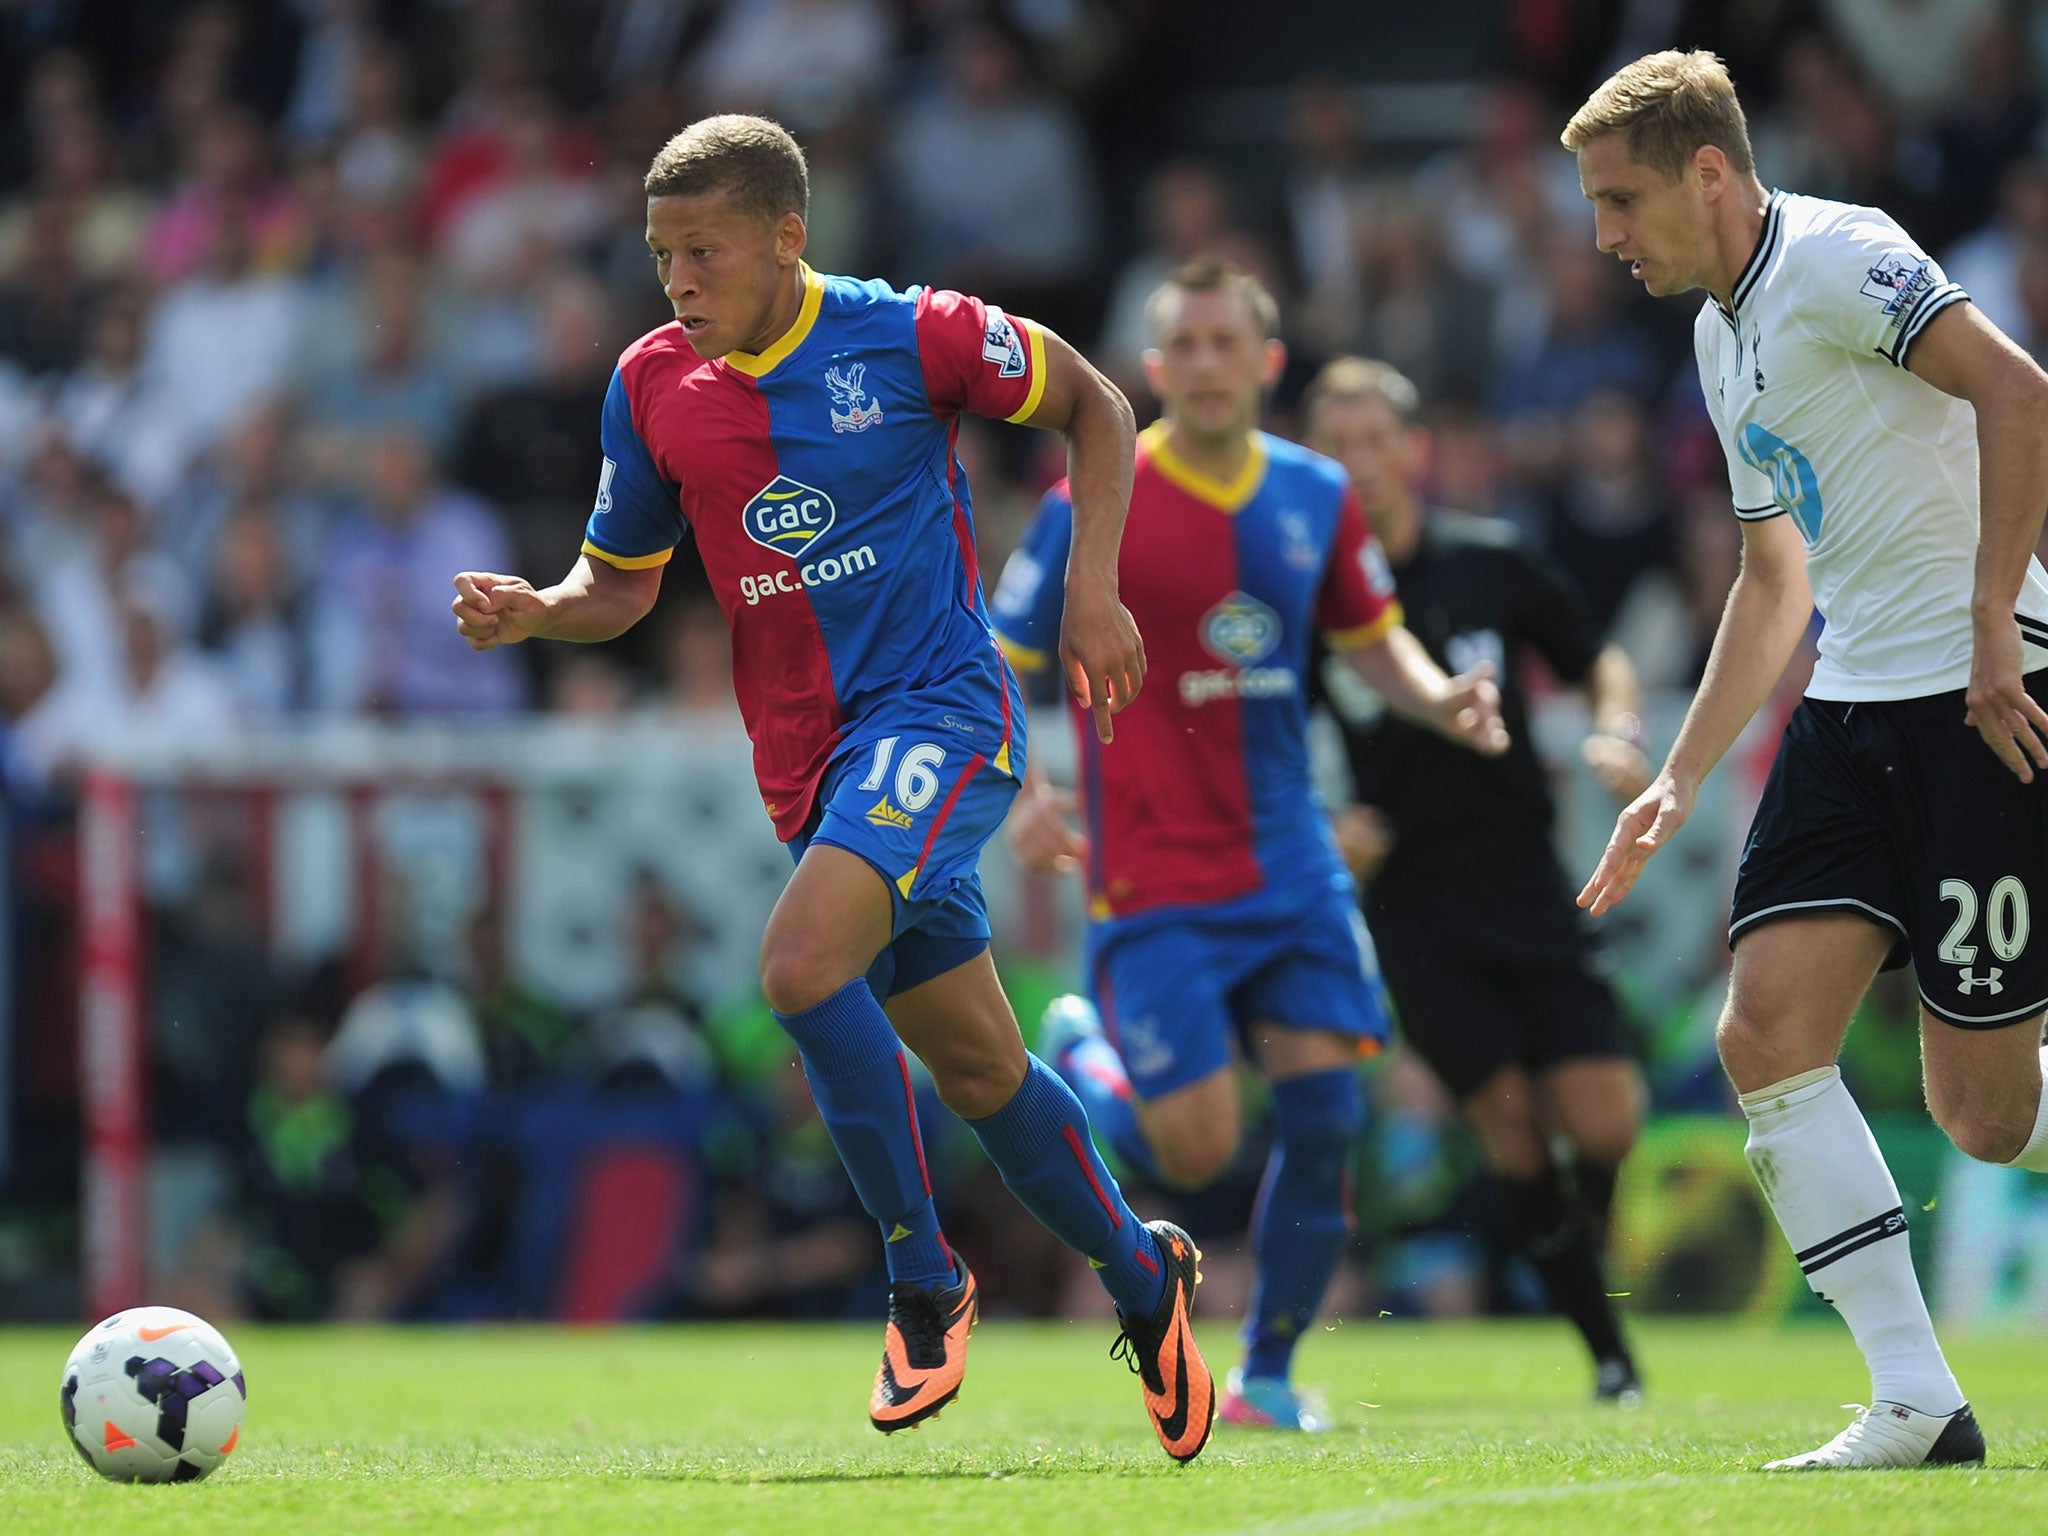 New Crystal Palace signing Dwight Gayle in action for the club against Tottenham today